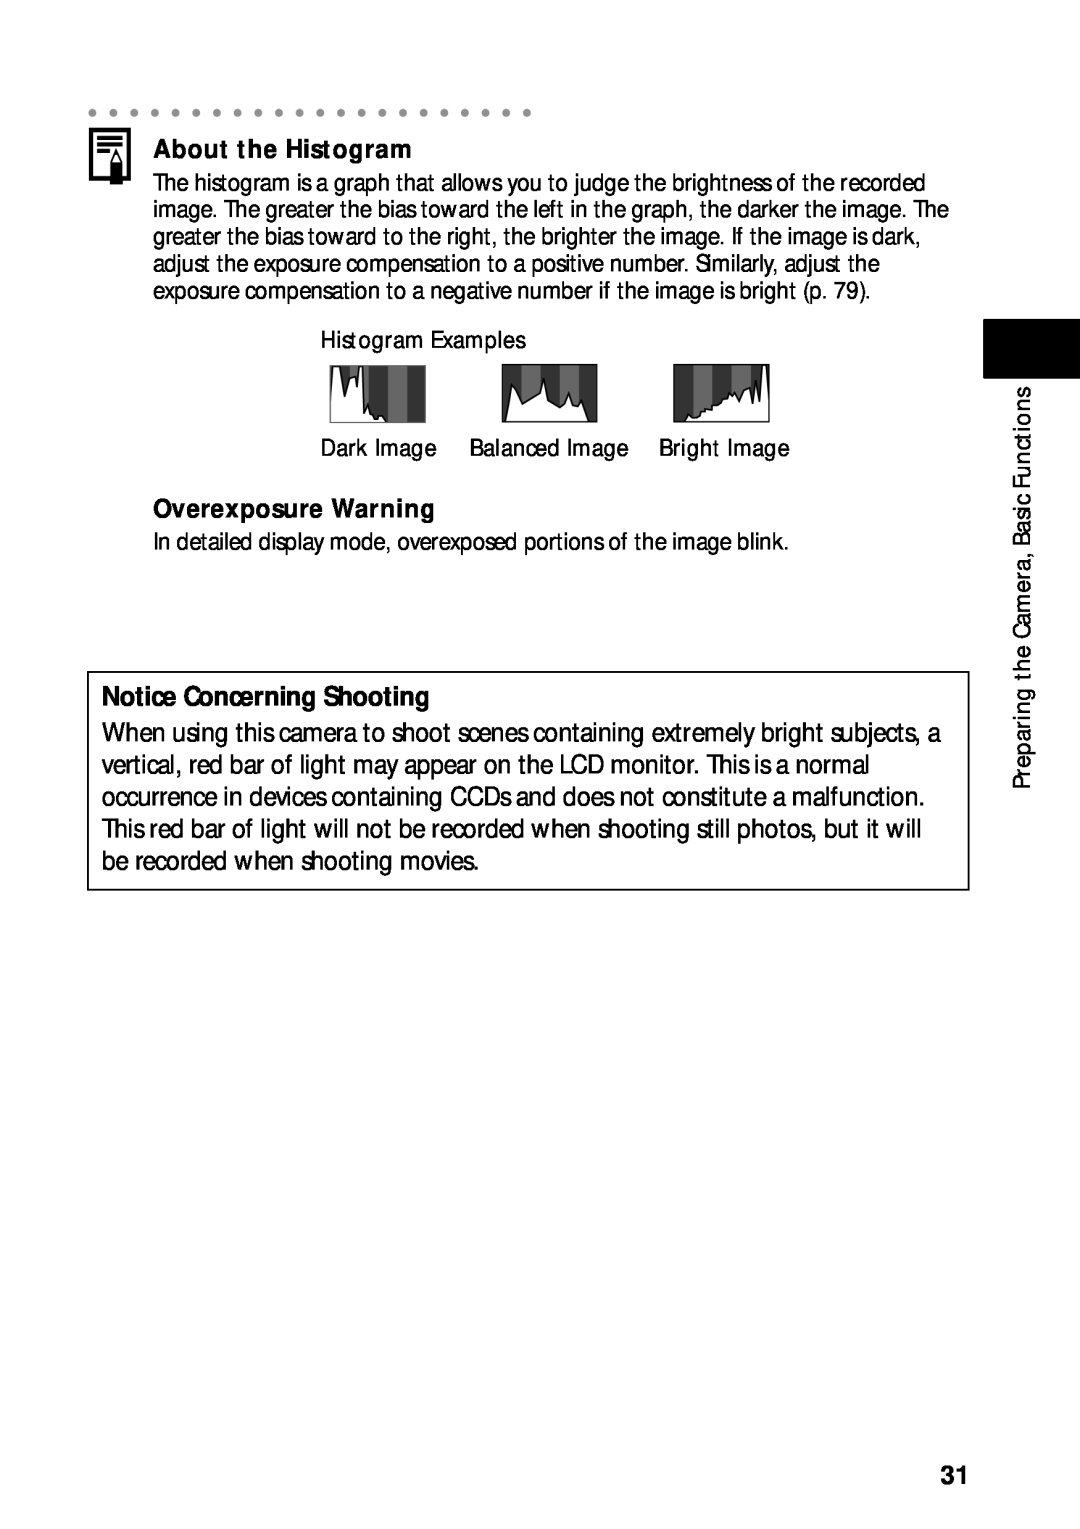 Canon PowerShot S45 manual Notice Concerning Shooting, About the Histogram, Overexposure Warning 